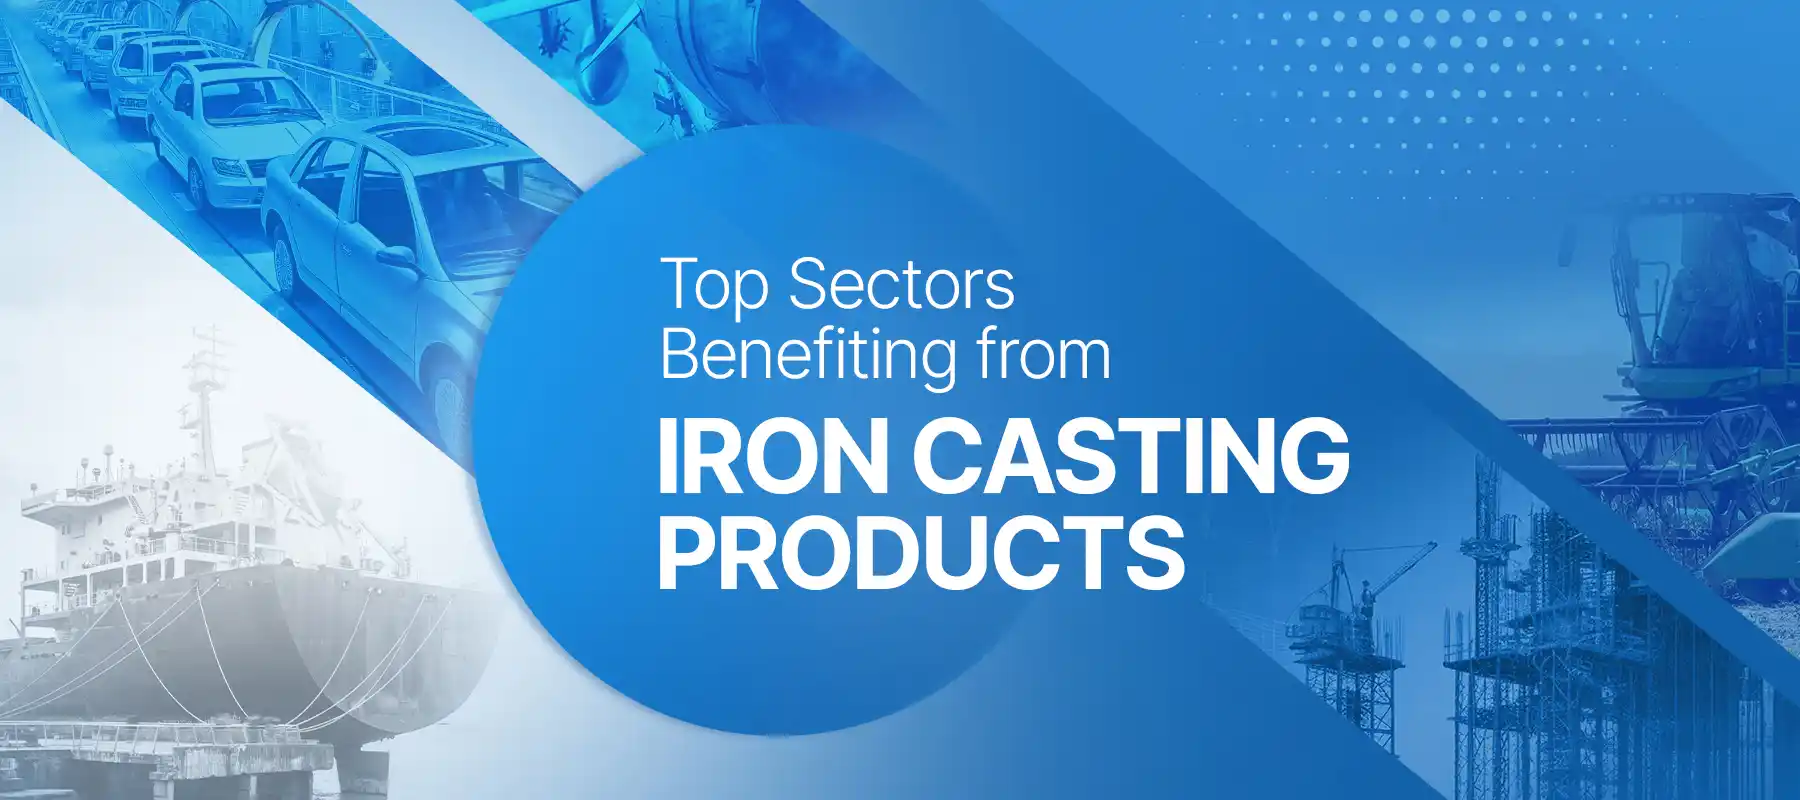 Top Sectors Benefiting from Iron Casting Products